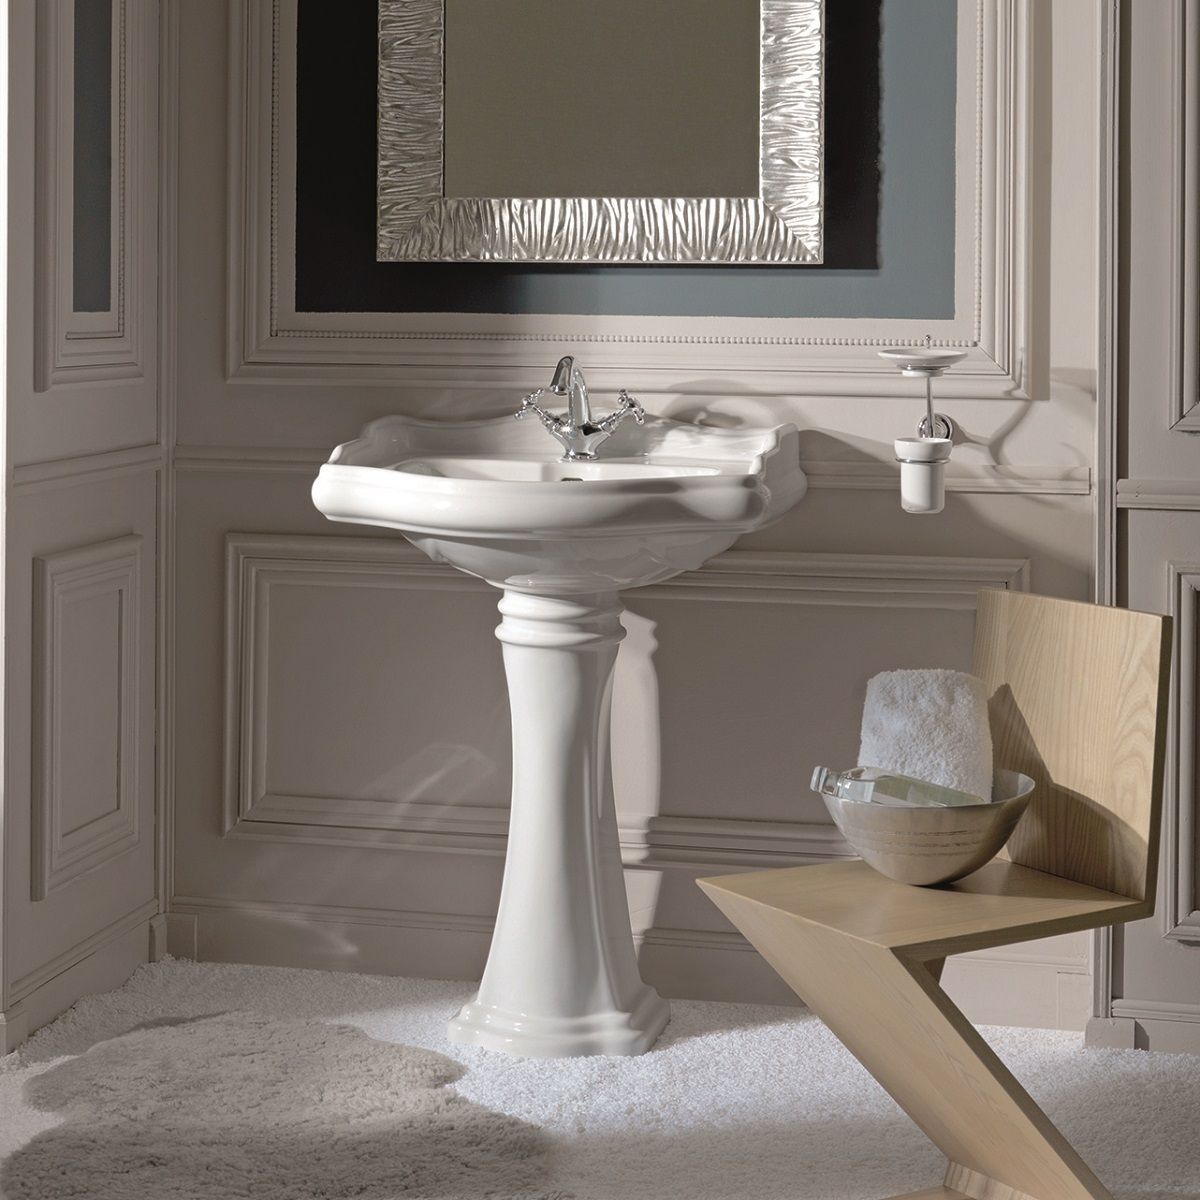 How to Use Space - Pedestal Sink